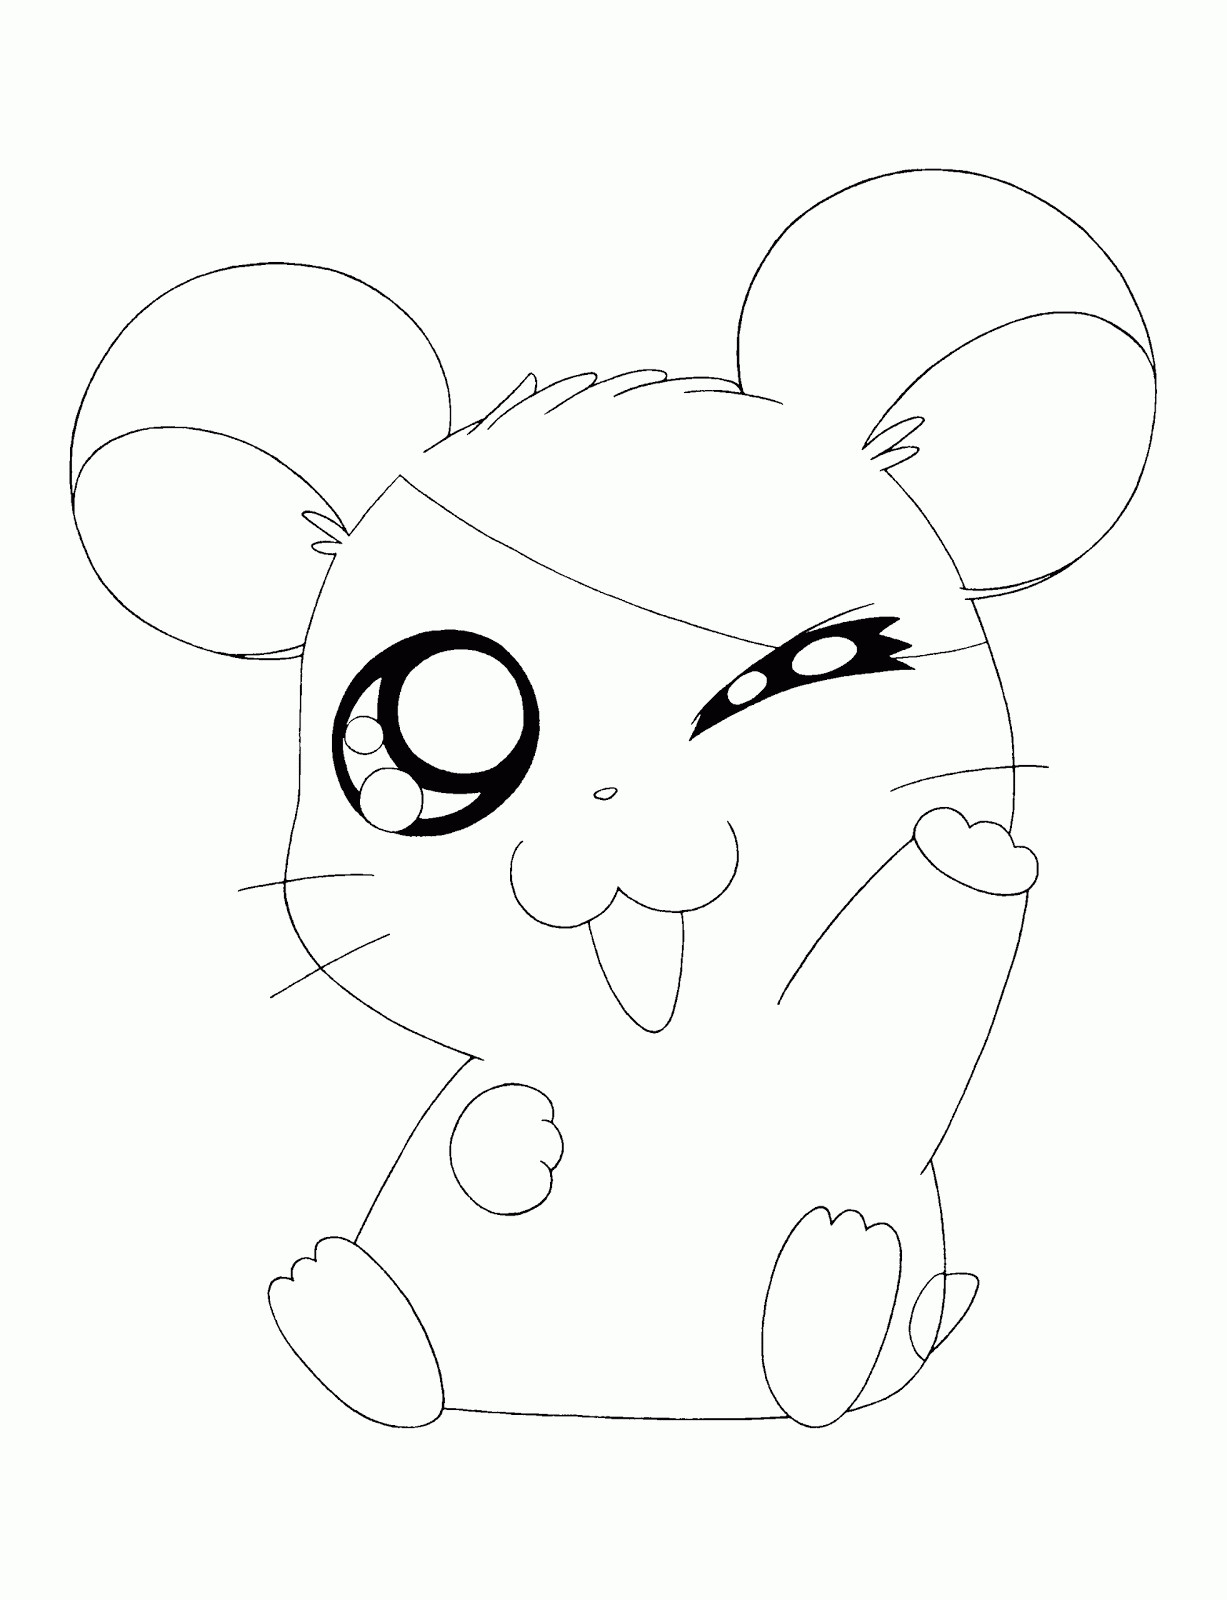 21 Of The Best Ideas For Cute Animal Coloring Pages For Kids - Home